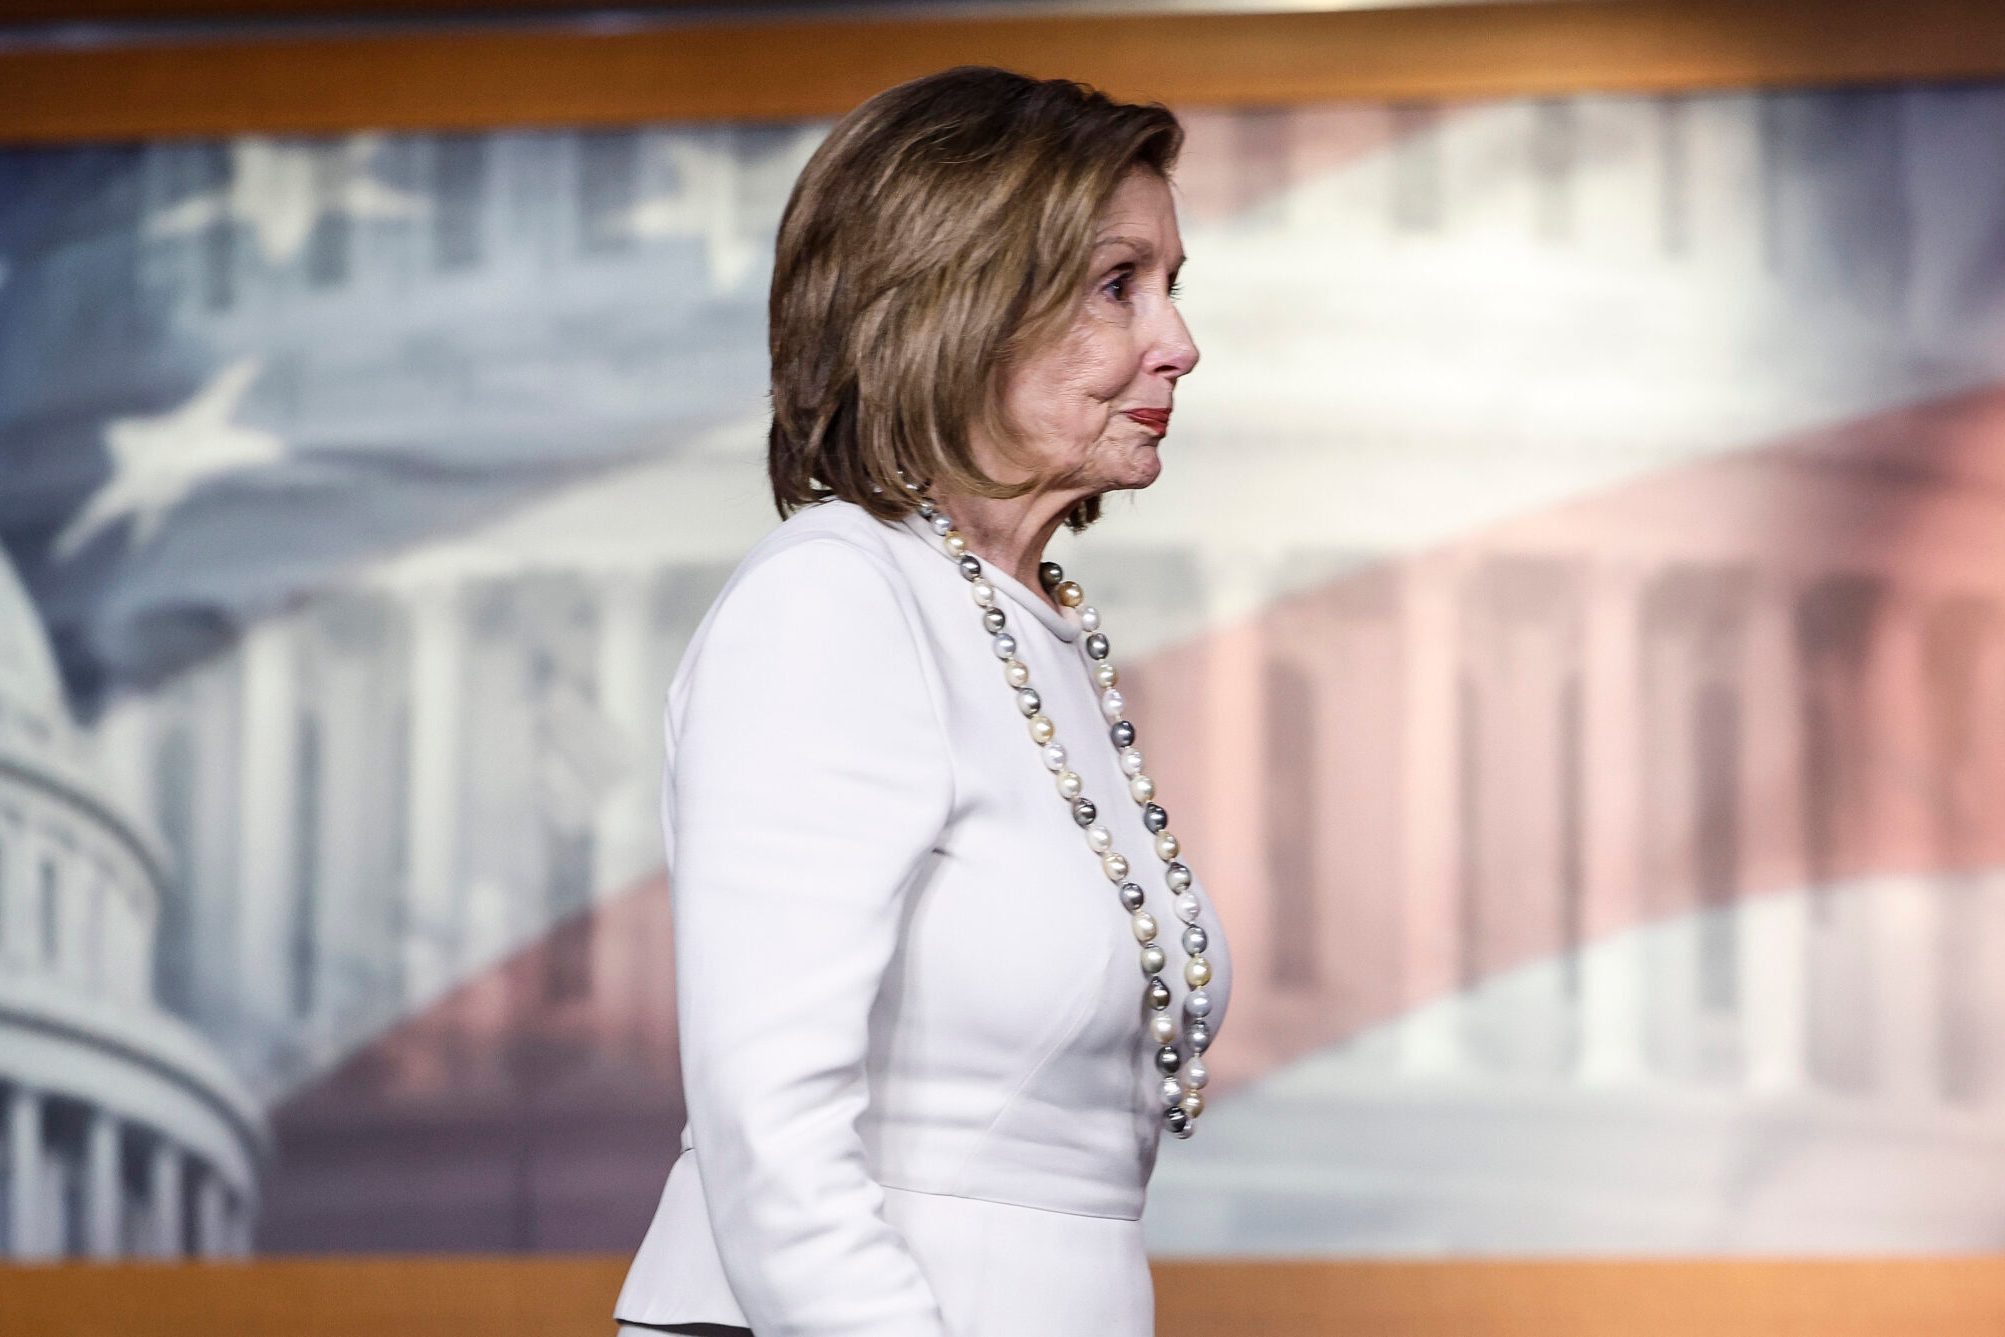 A woman in a white suit and pearl necklace stands sideways in front of a backdrop featuring a blurry image of the U.S. Capitol Building and American flag.